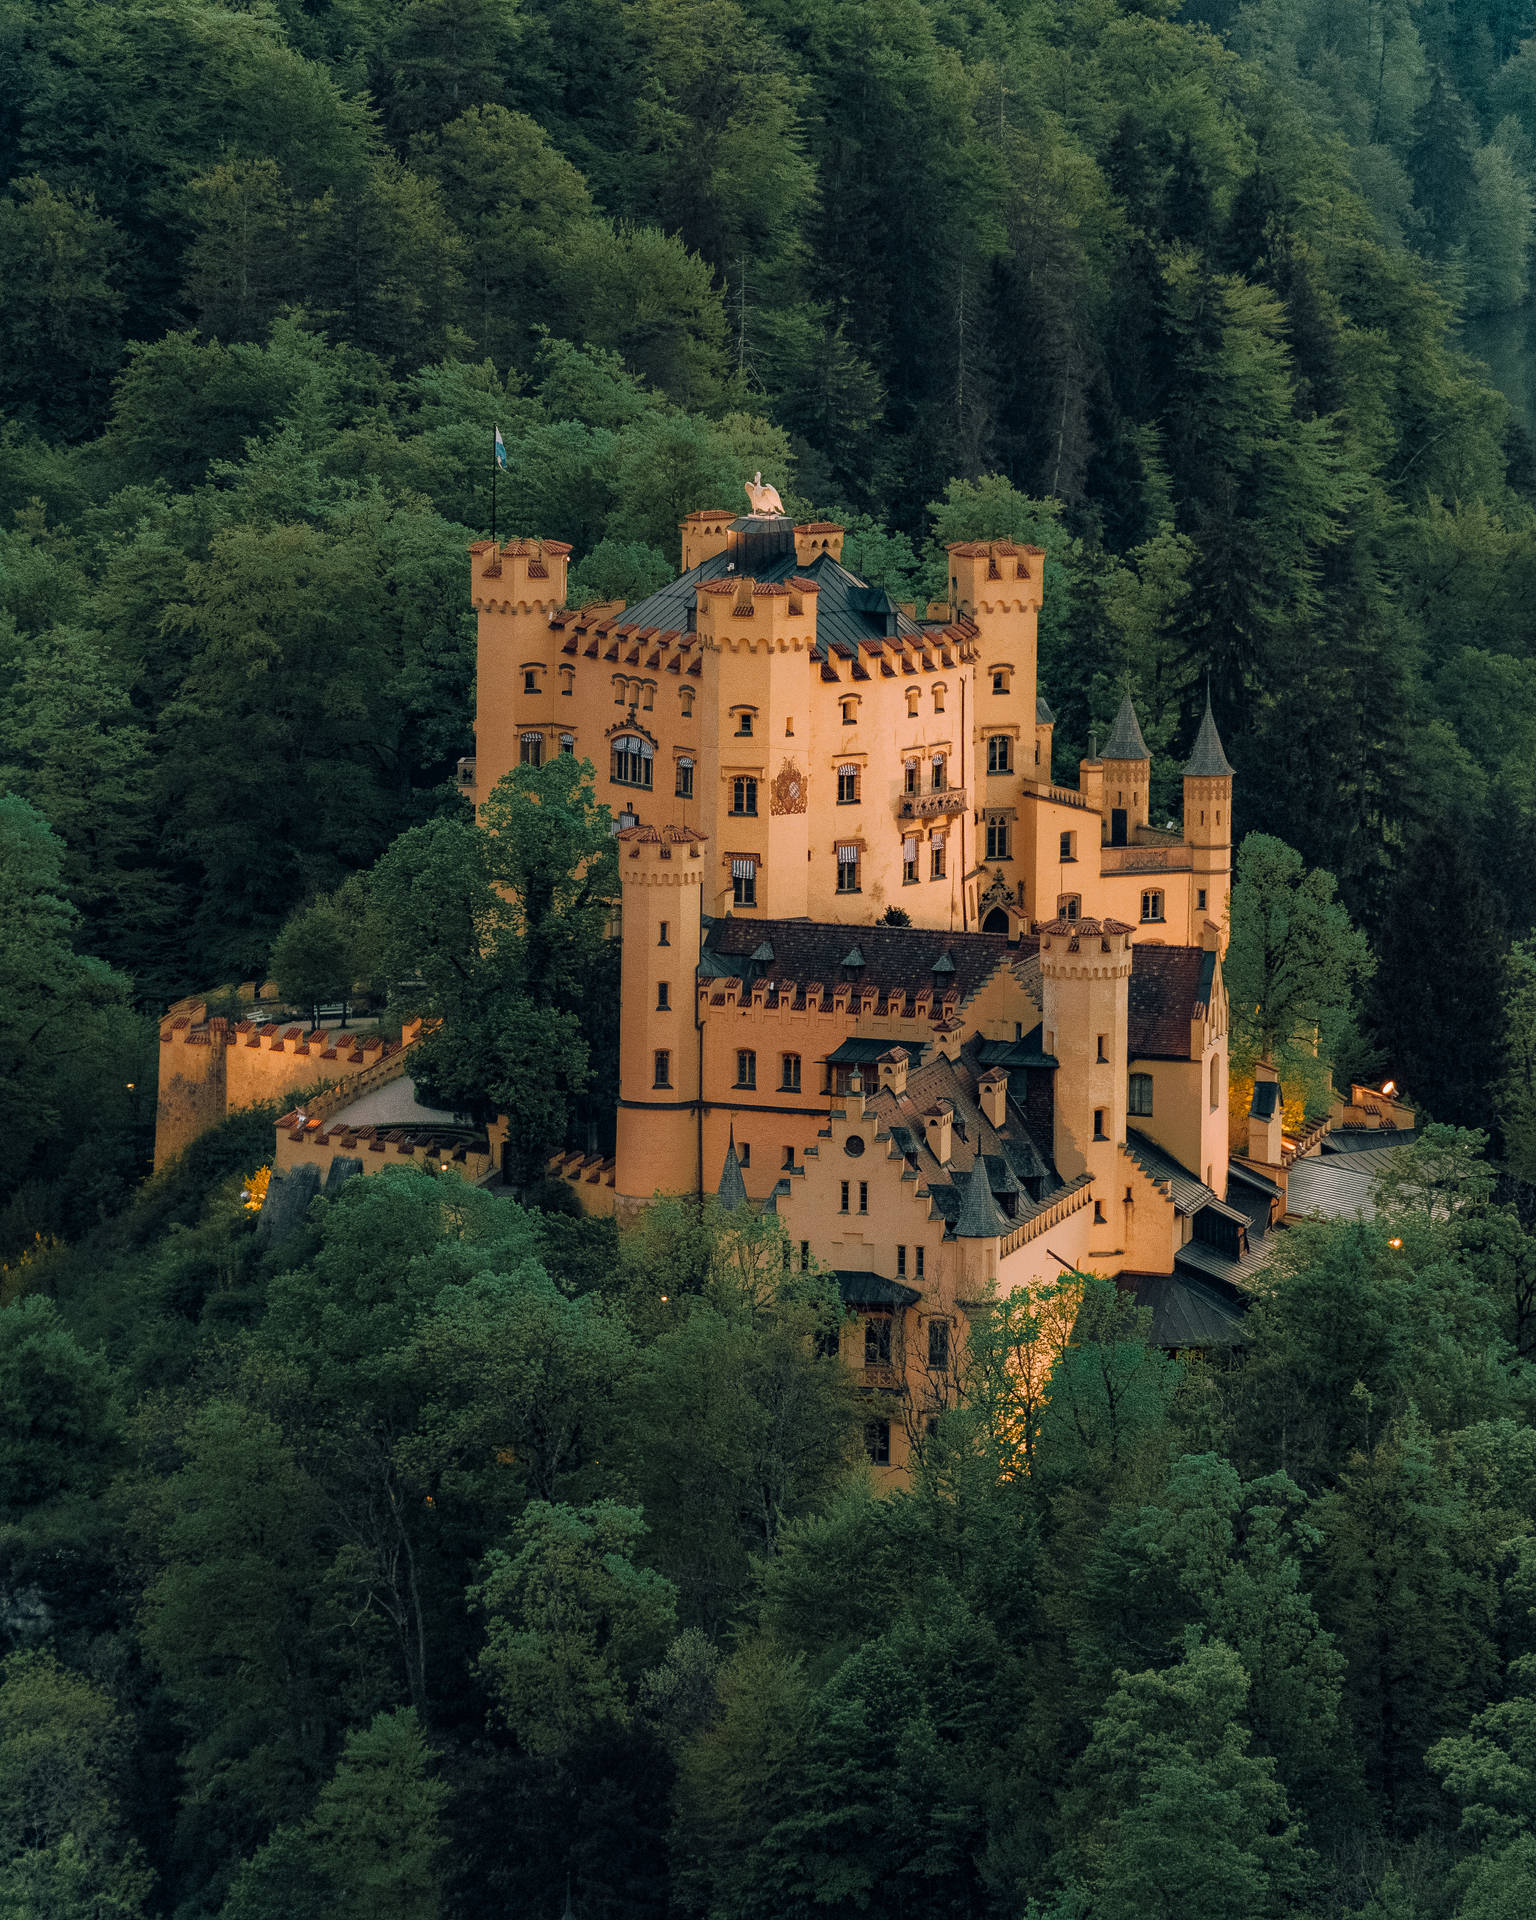 Germany's Secluded Massive Castle